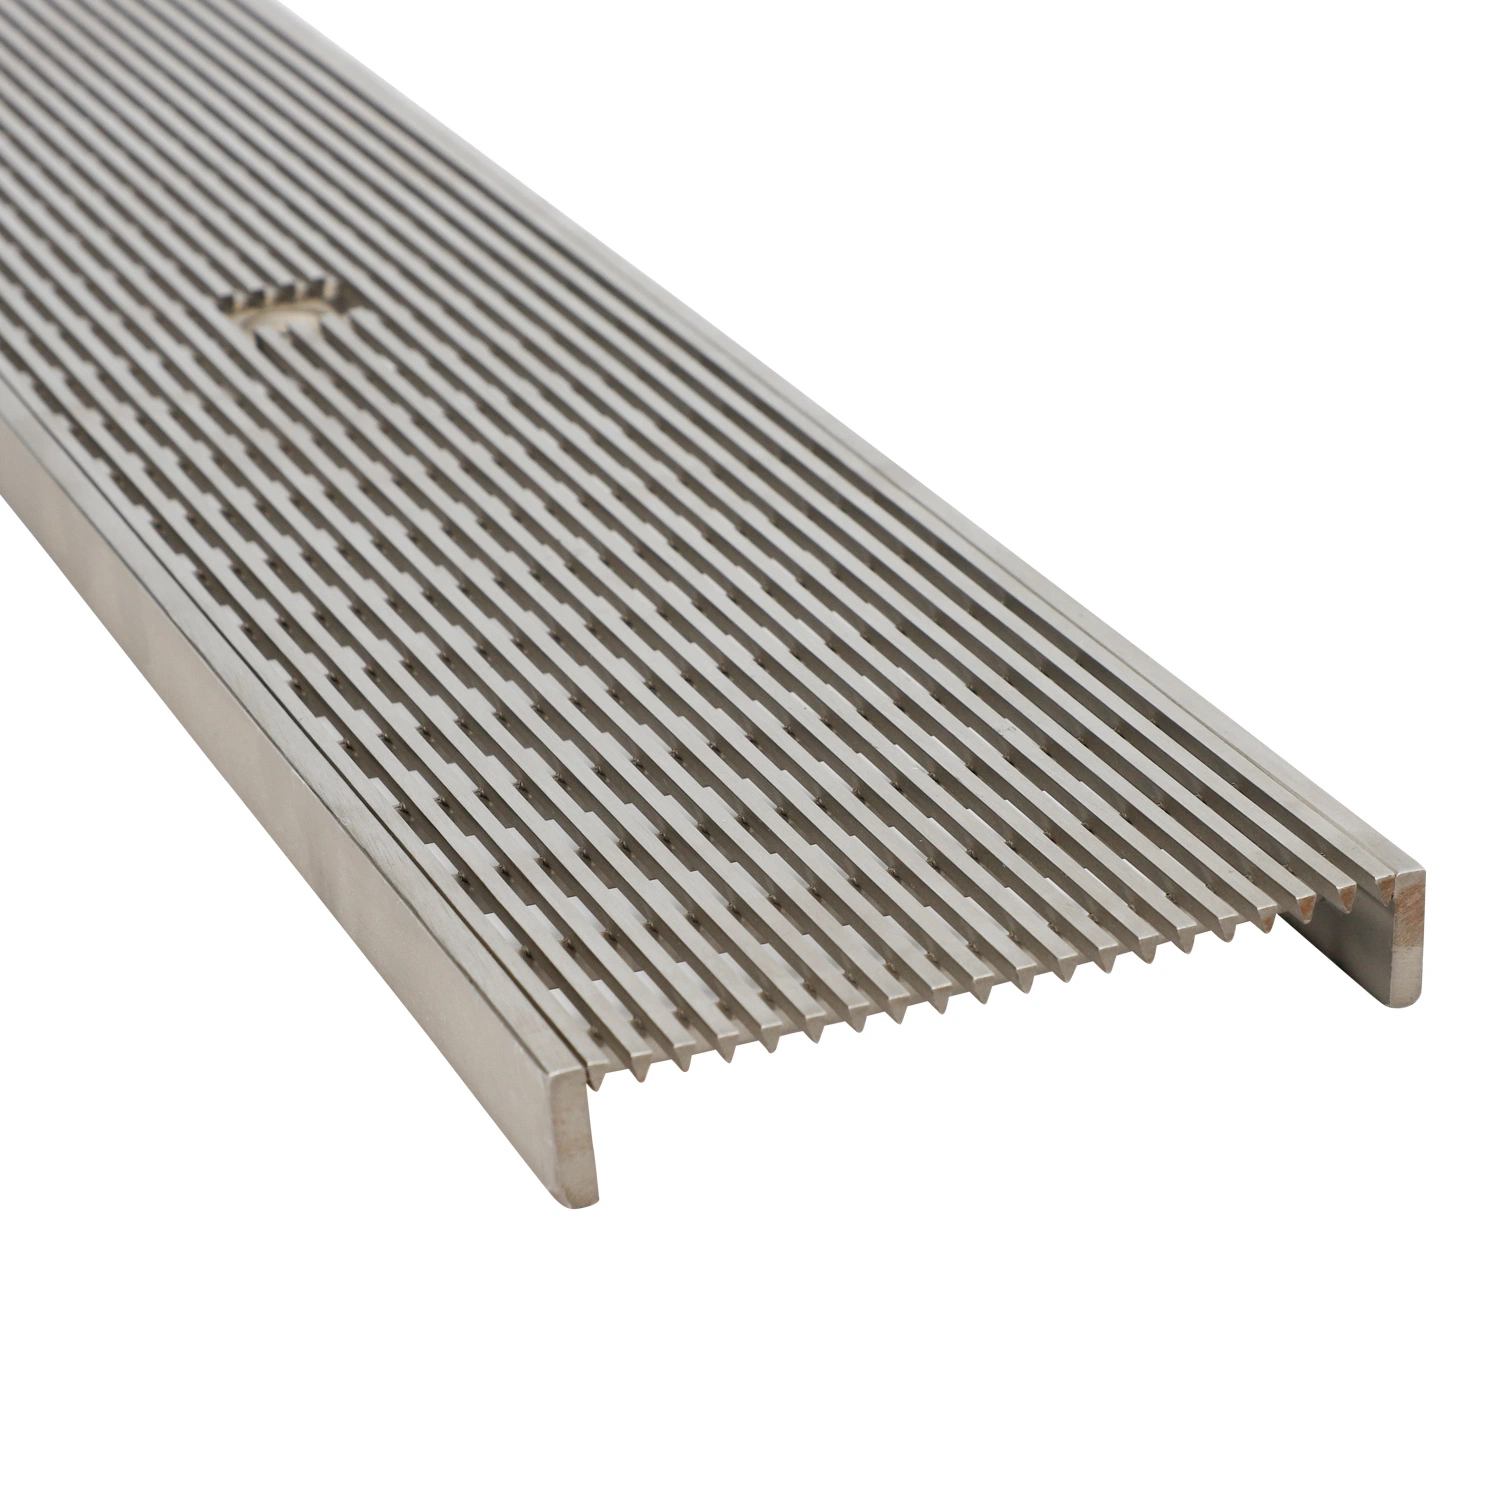 Swimming Pool Grating/ Strip Grate/ Heavy Duty Stainless Steel Heel Guard Grate Rain Brushed Linear Drain Stainless Steel Drainage Channel